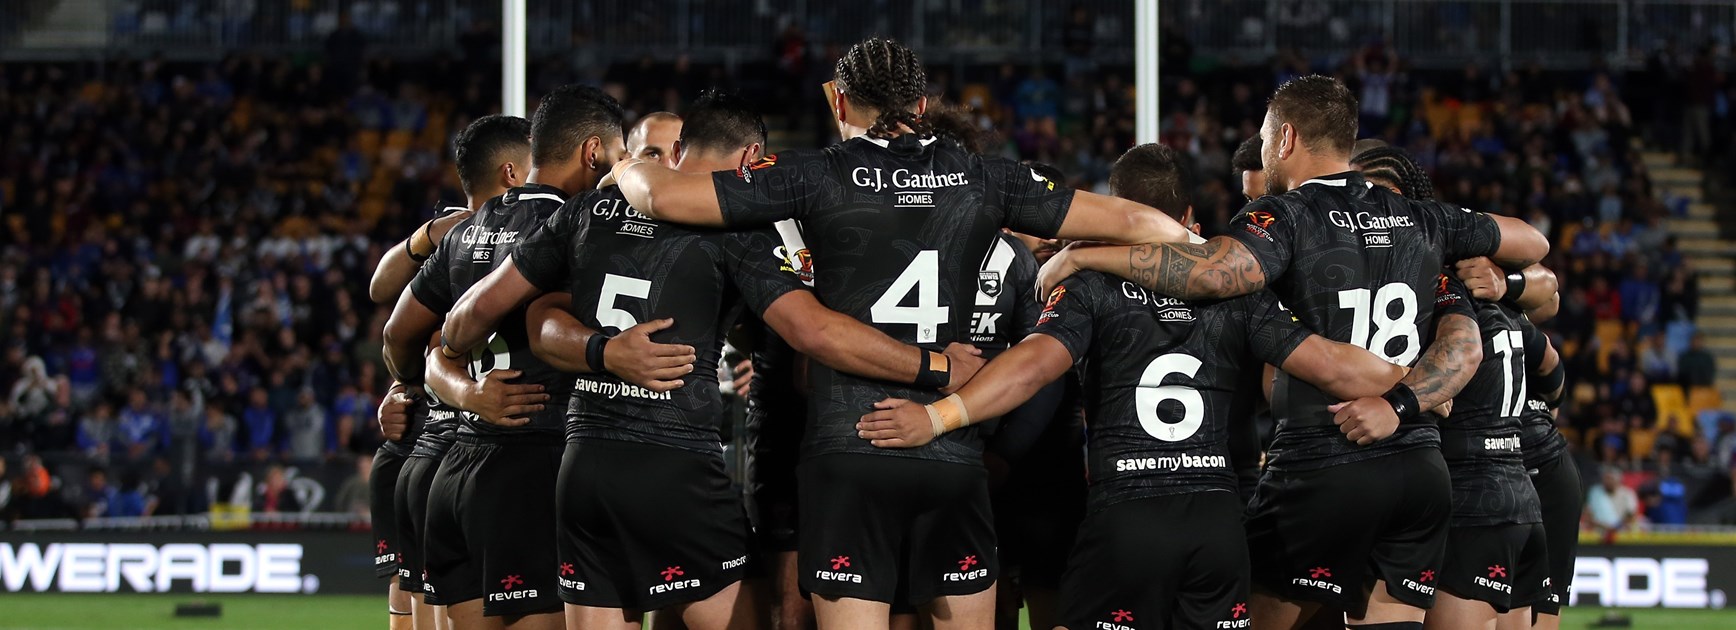 New Zealand are determined to bounce back after their disappointing World Cup campaign.